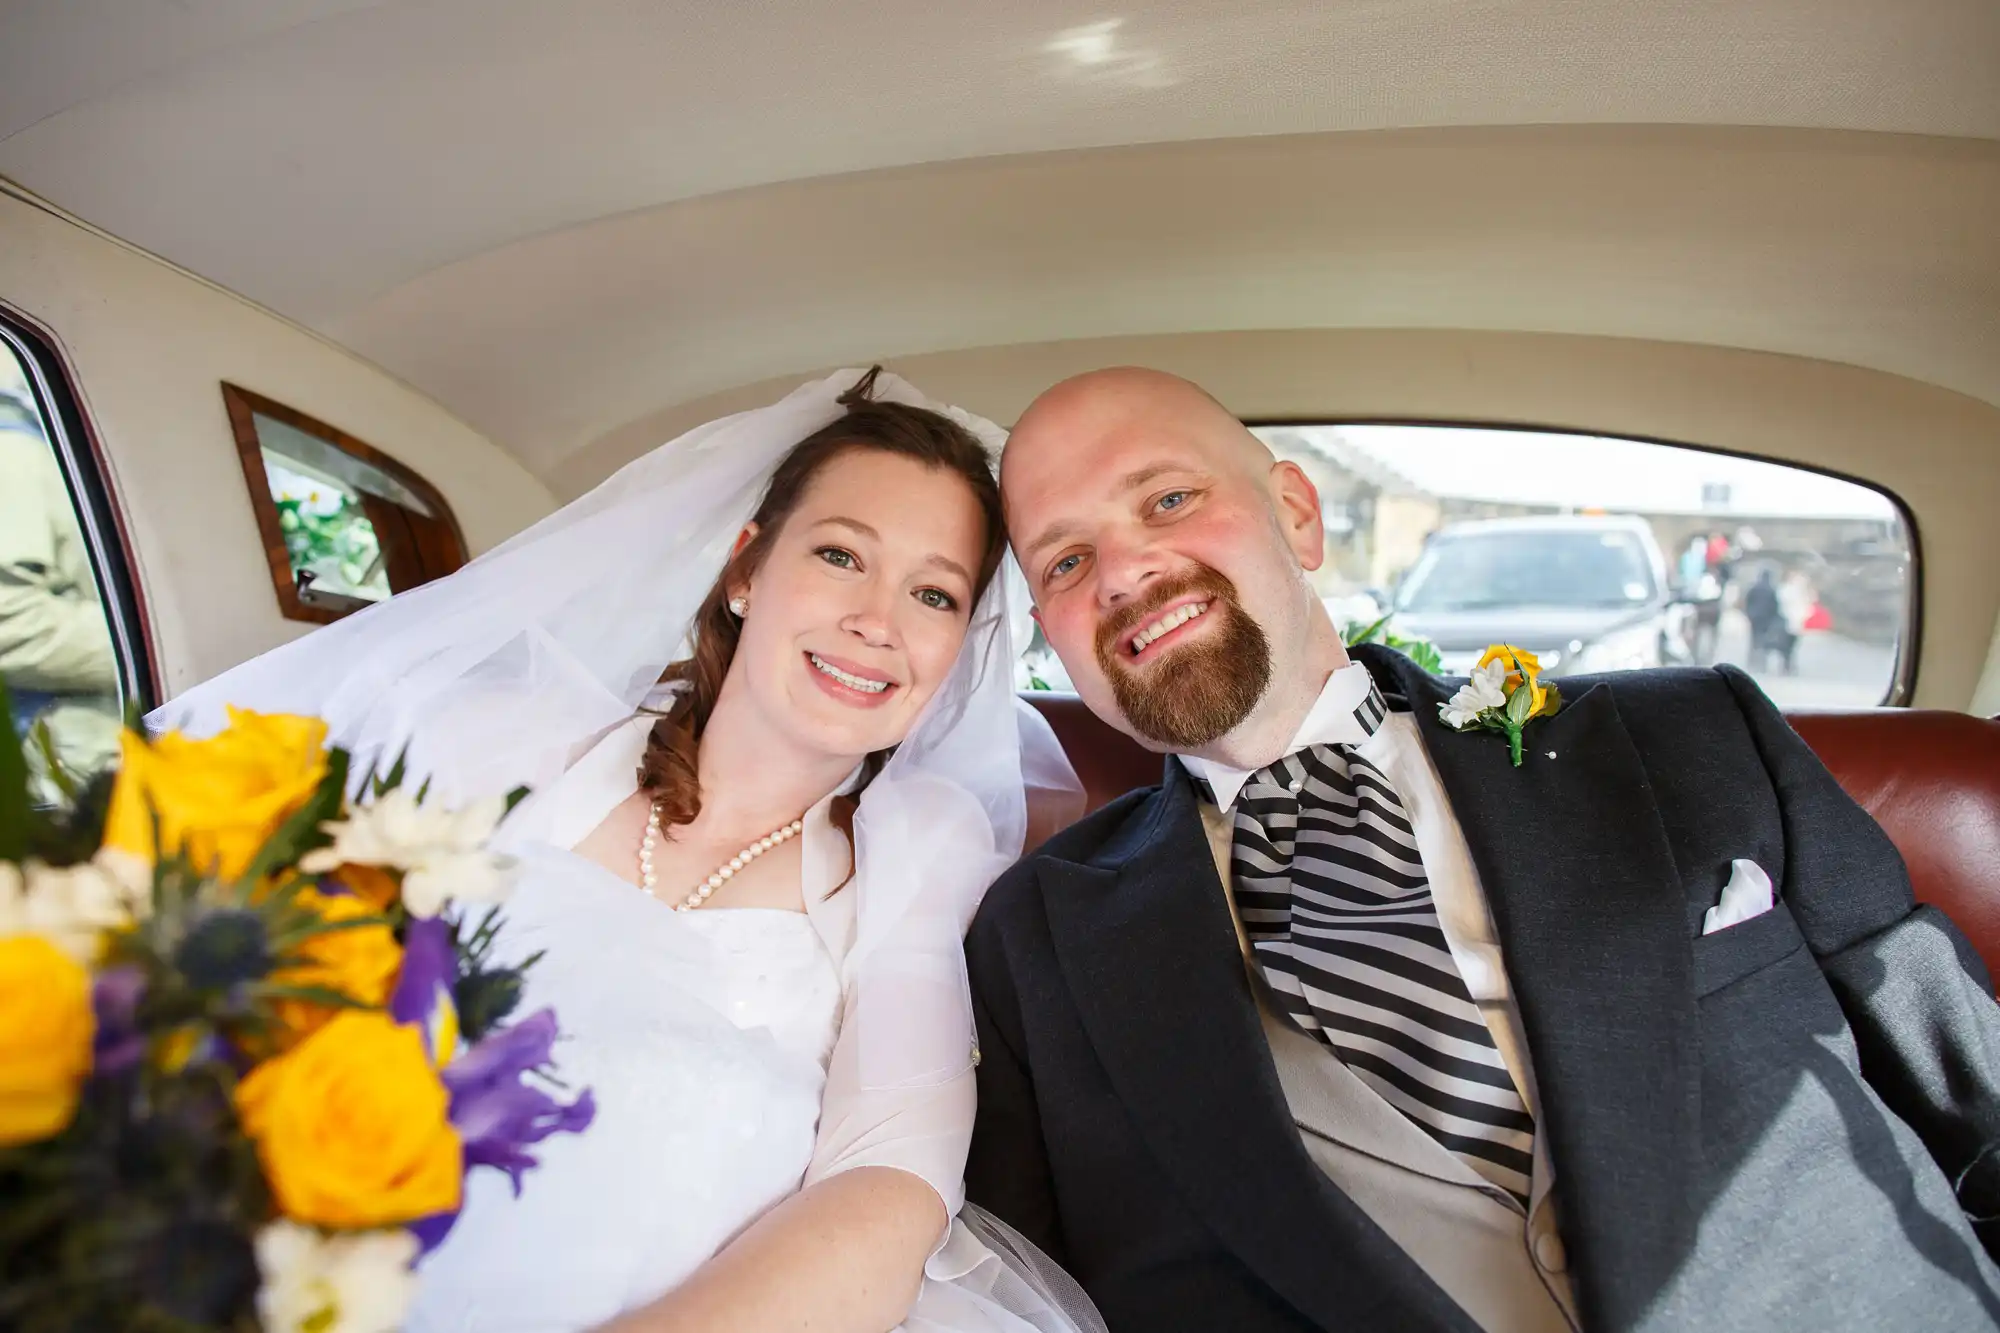 A newlywed couple smiling inside a vintage car, the bride in a white dress and veil, the groom in a striped suit, with a bouquet in the foreground.